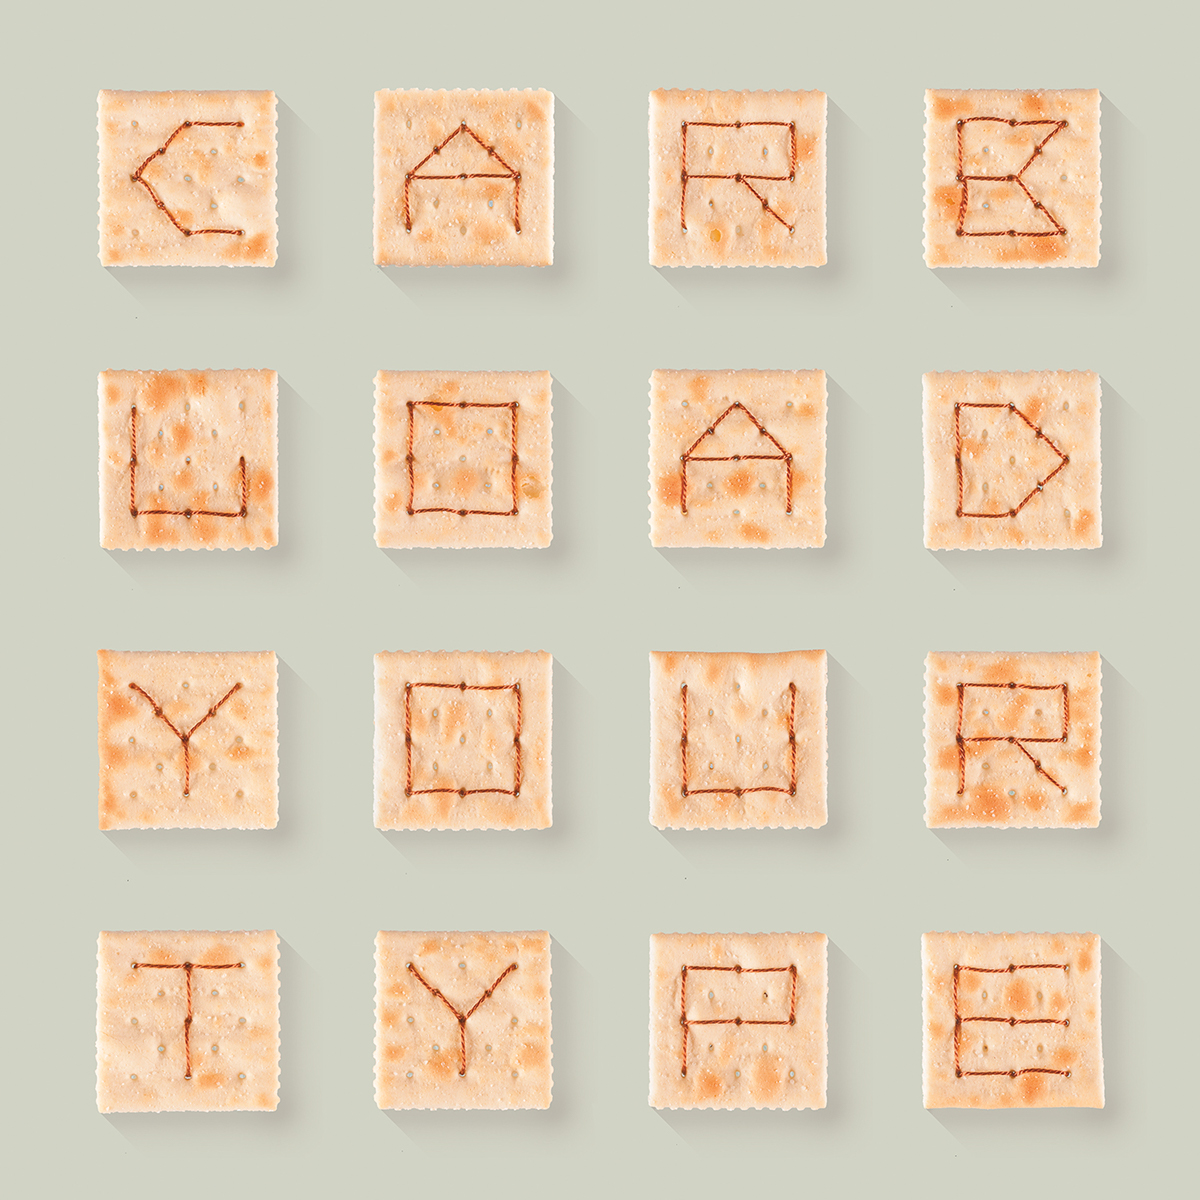 Typeface Nabisco Soup uppercase type experimental crackers Saltine Crackers play